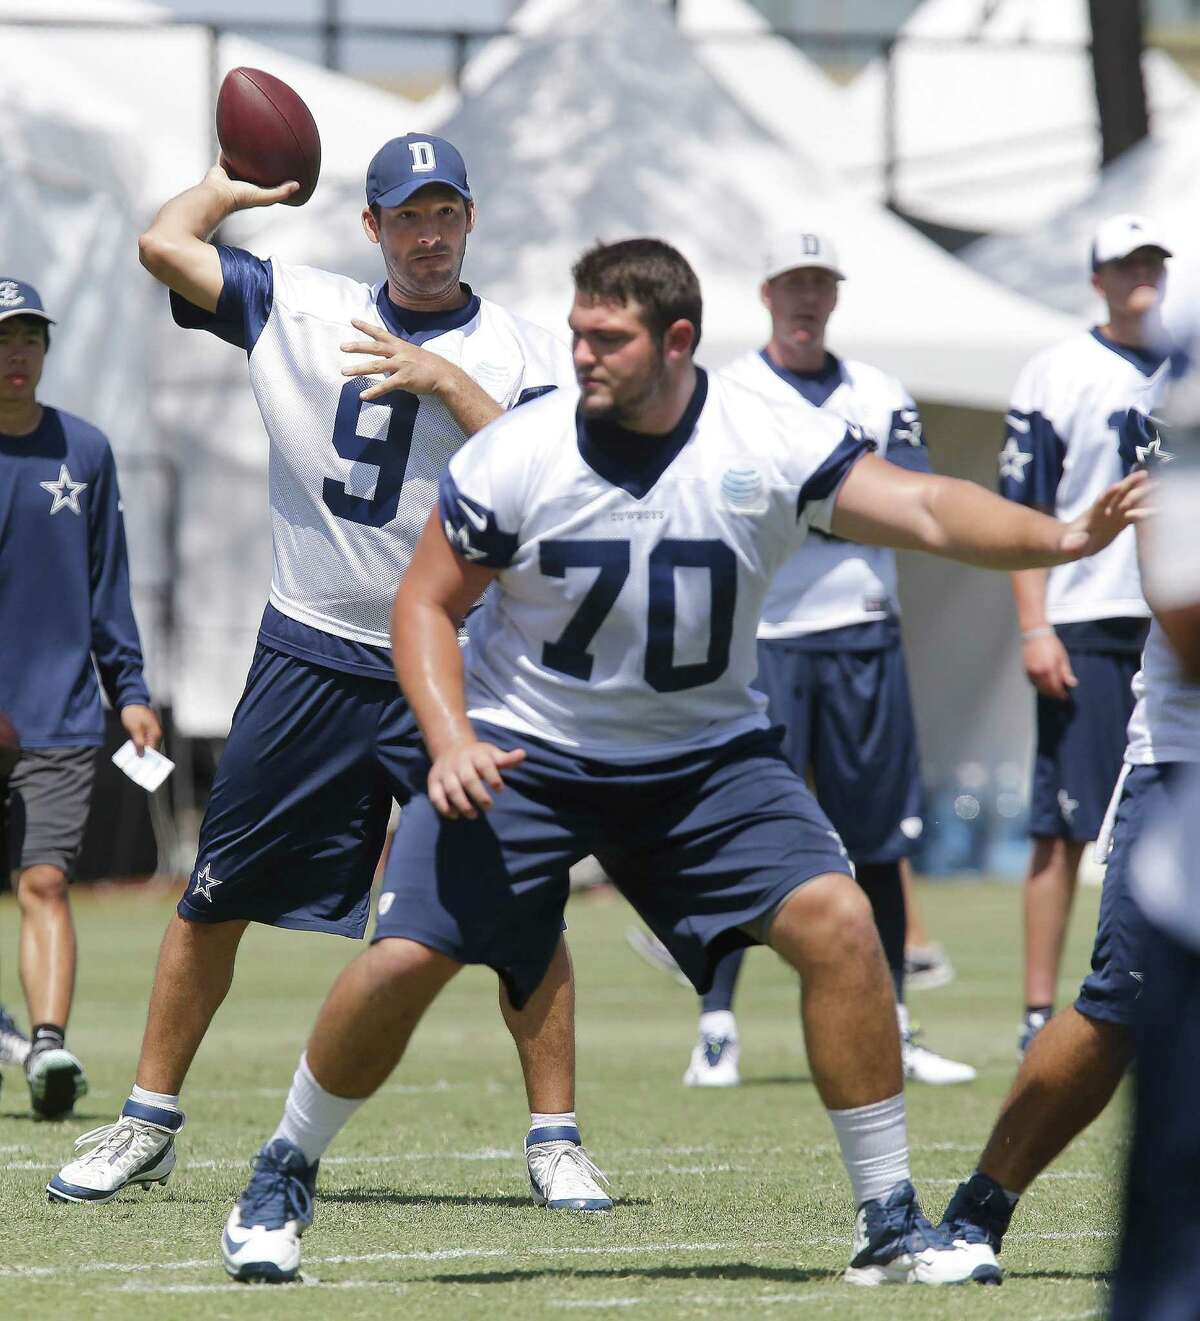 Dallas Cowboys quarterback Tony Romo (9) throws behind rookie offensive lineman Zack Martin during training camp in Oxnard, Calif., on Friday, July 25, 2014. (Ron T. Ennis/Fort Worth Star-Telegram/MCT)